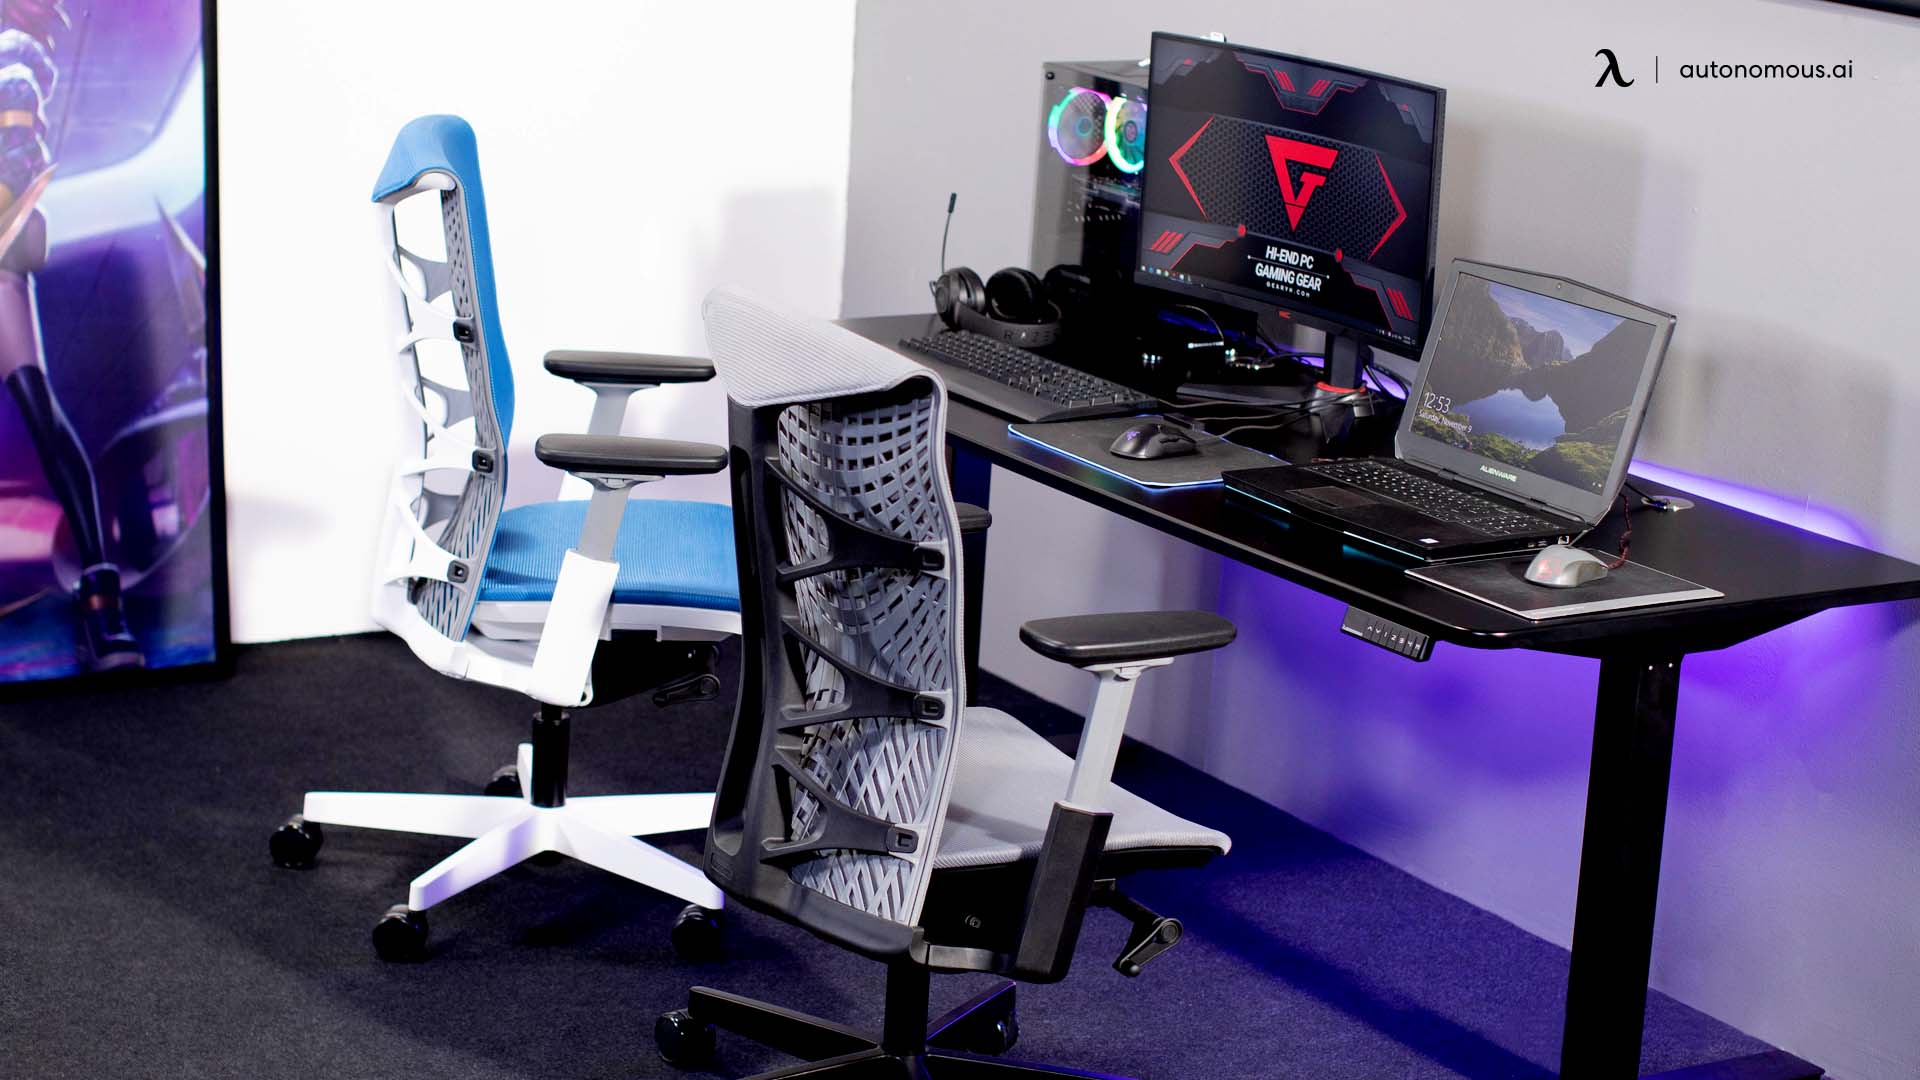 What Features Does Gaming Chair 2021 Have?